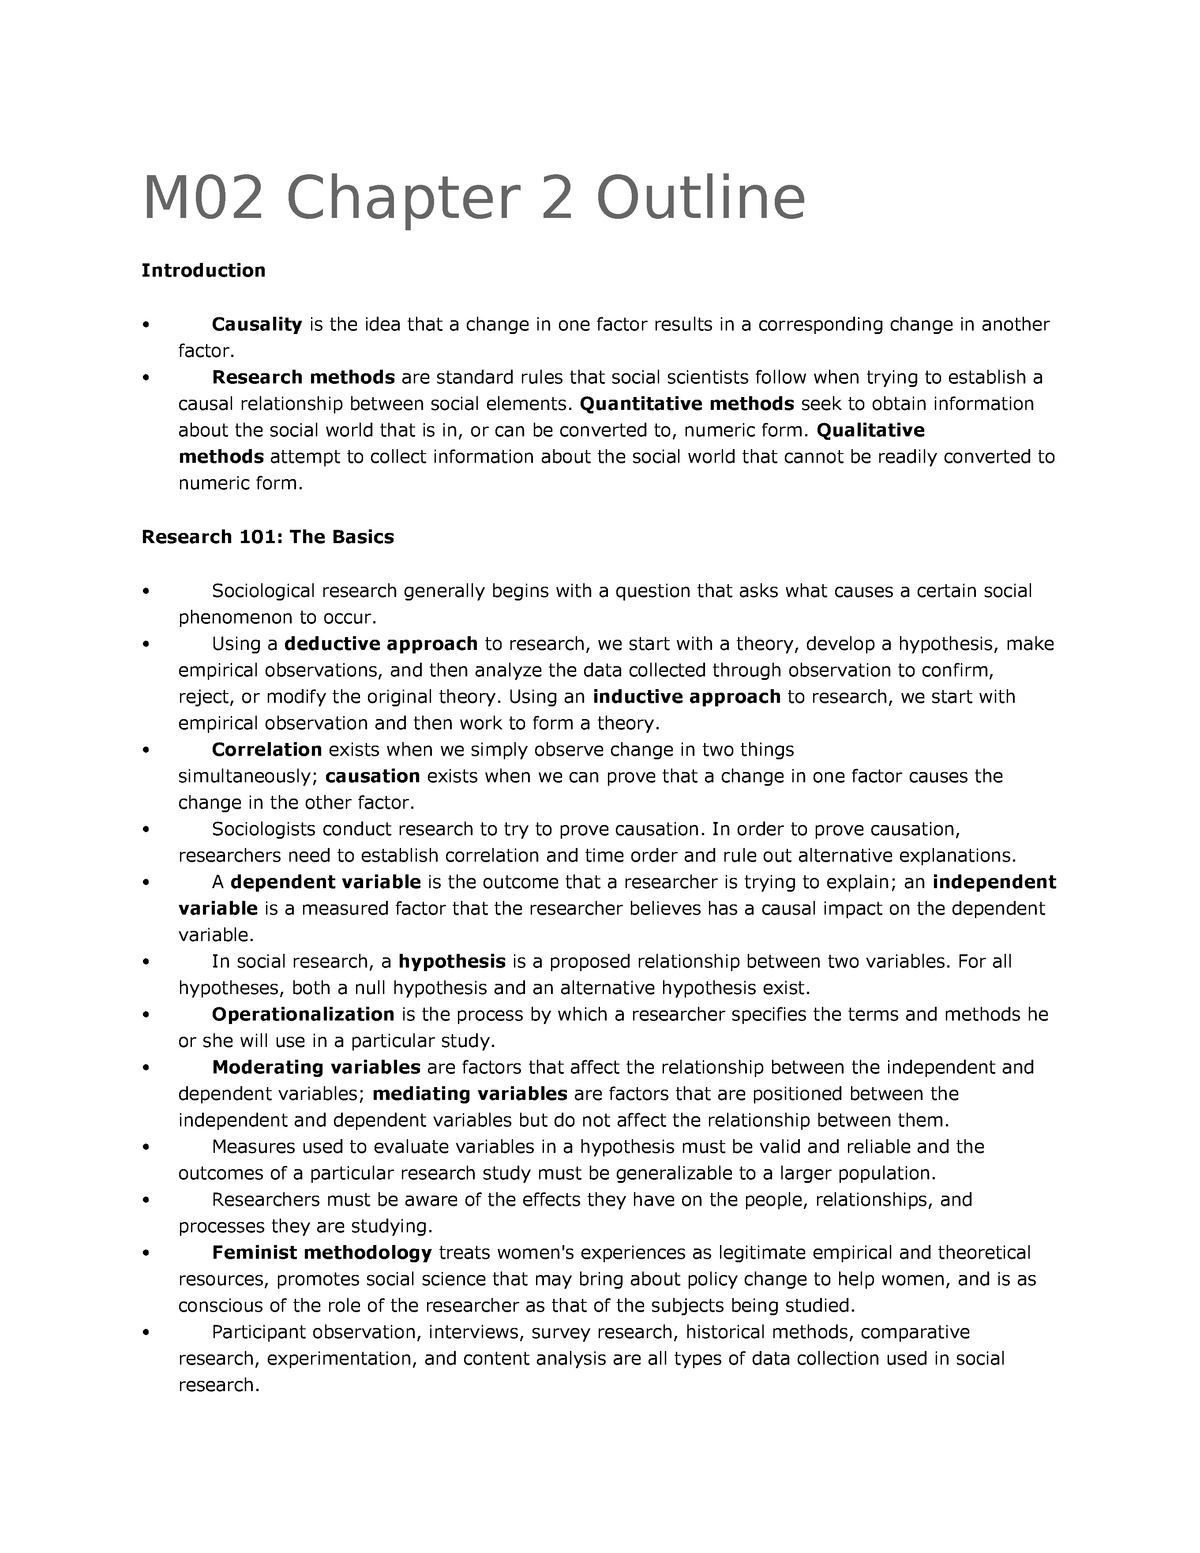 m02 assignment case studies chapter 2 and 3